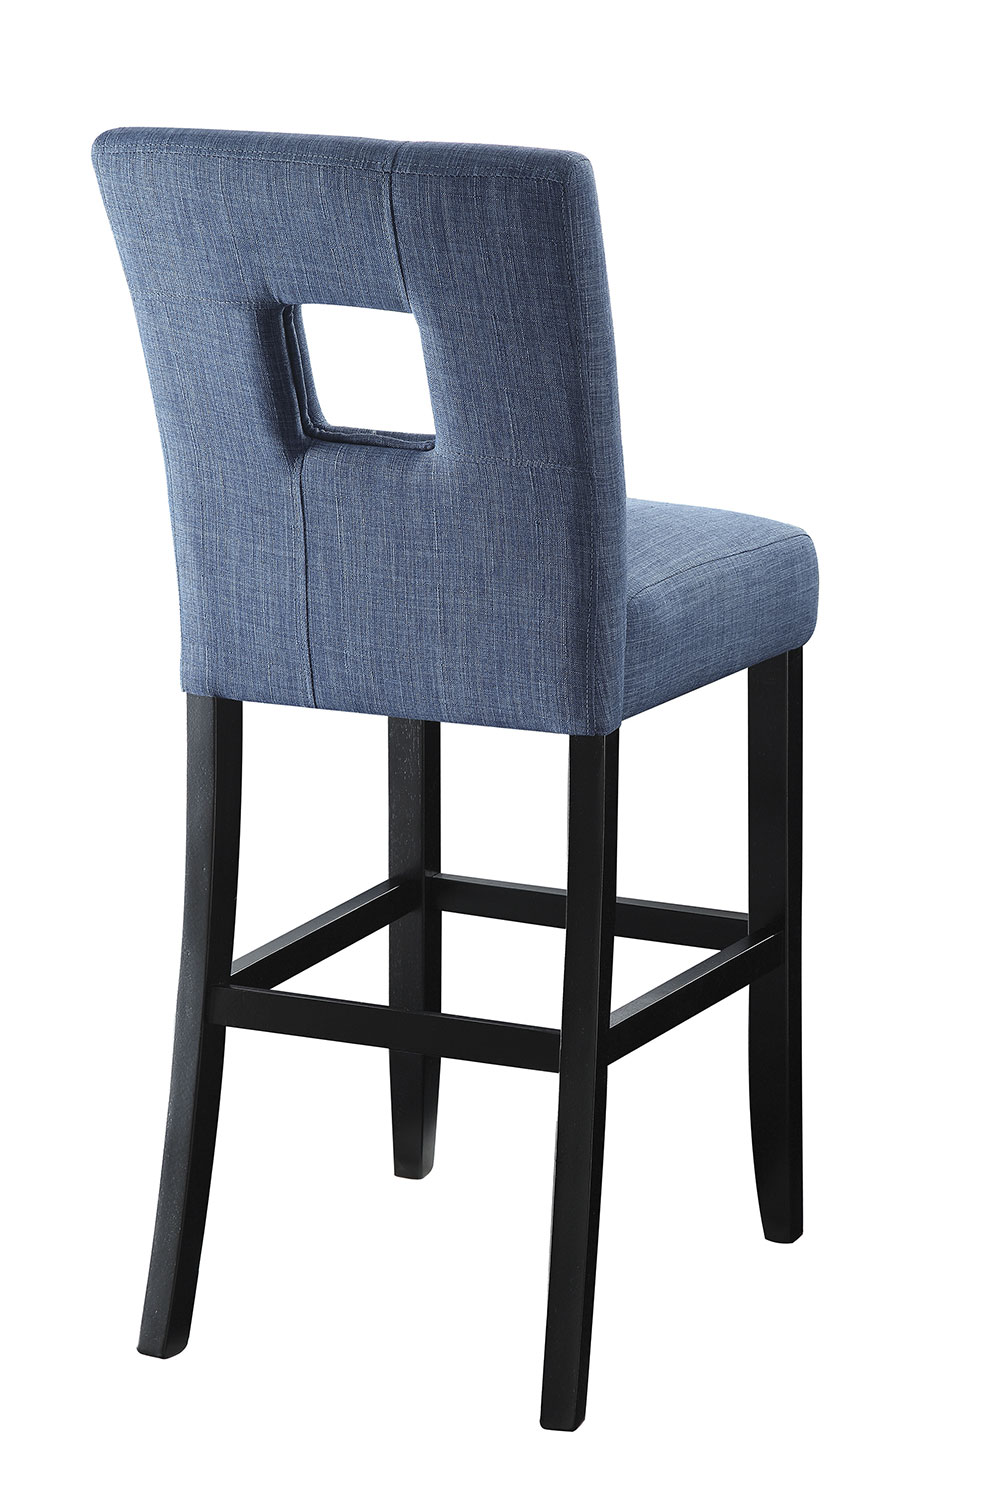 Coaster Andenne Counter Height Chair - Blue/Black